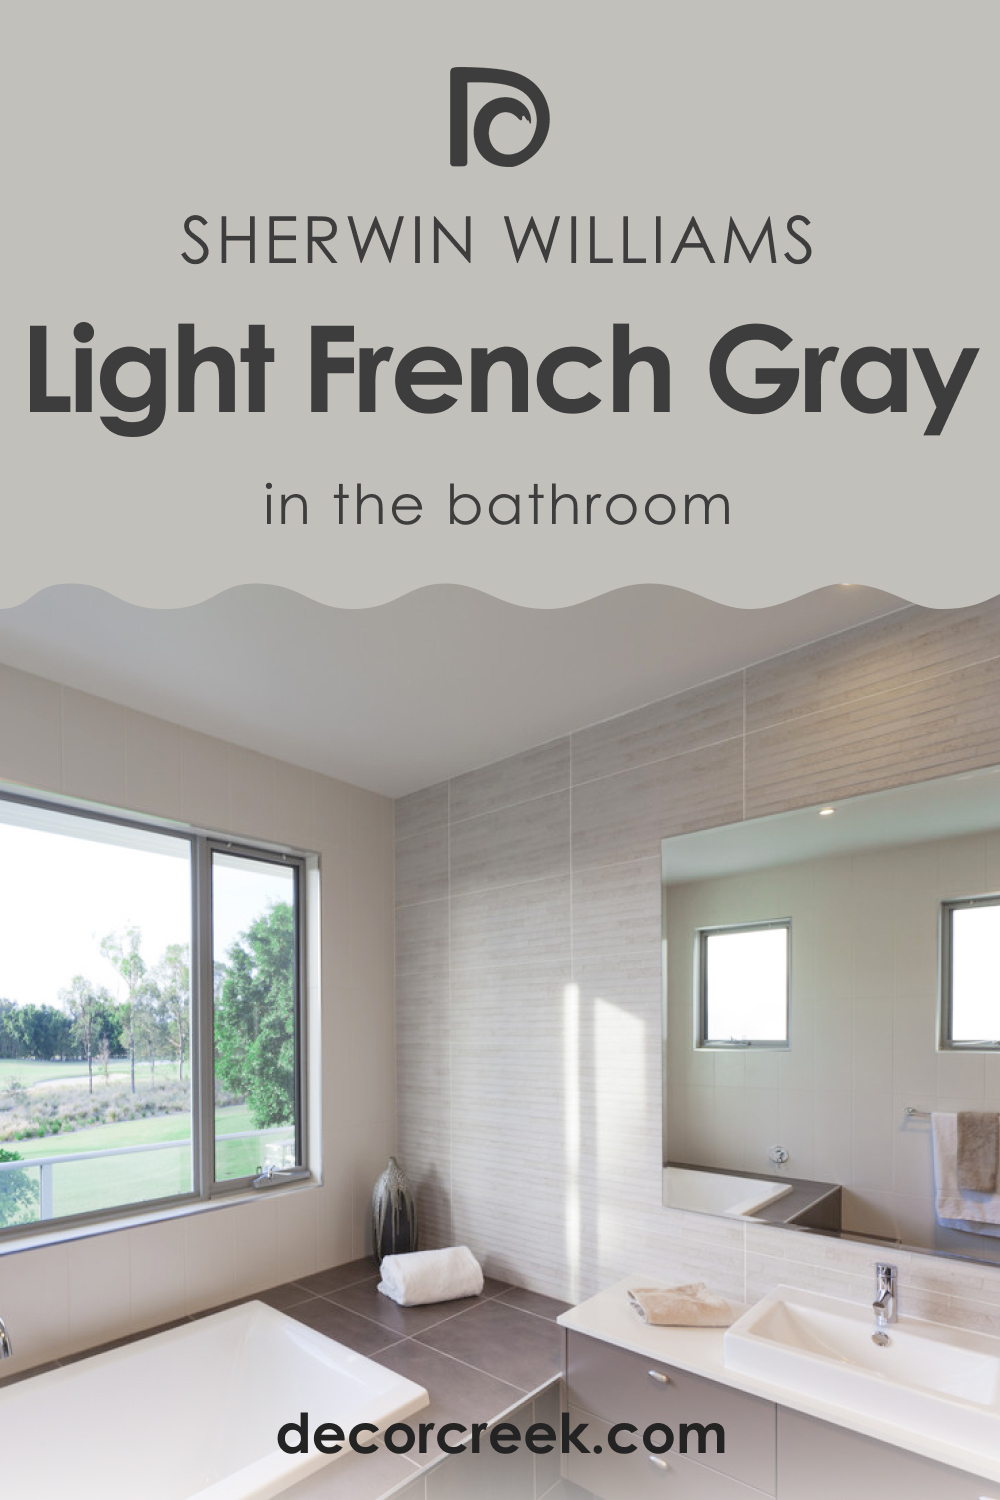 How to Use SW 0055 Light French Gray in the Bathroom?